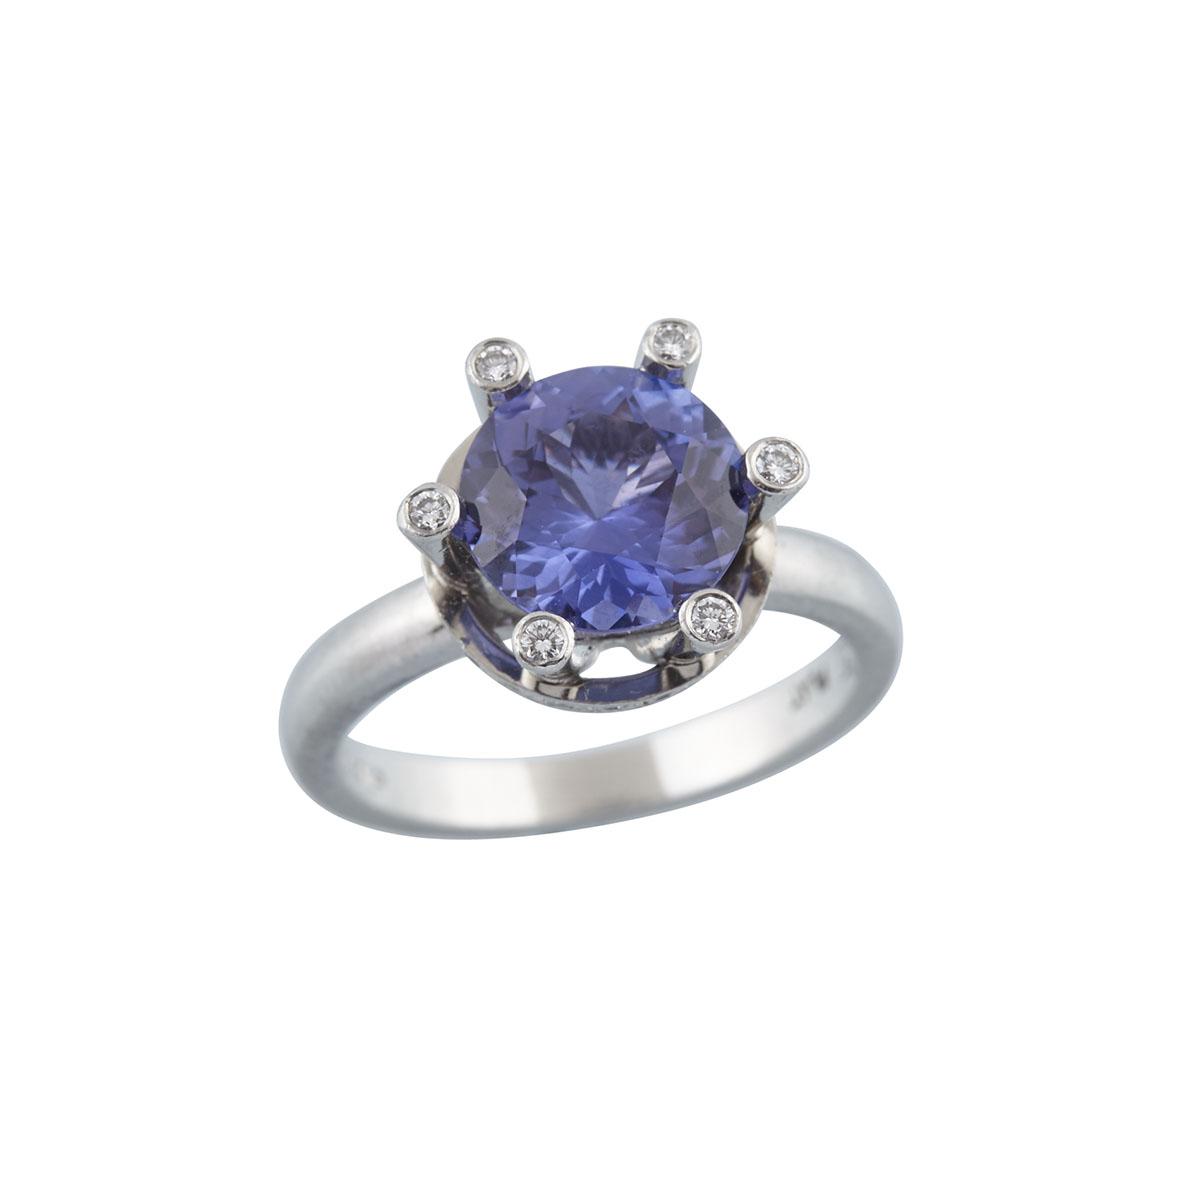 J.VAIR PLATINUM RINGset with a full cut purple sapphire (approx. 2.90ct.) in a mount decorated